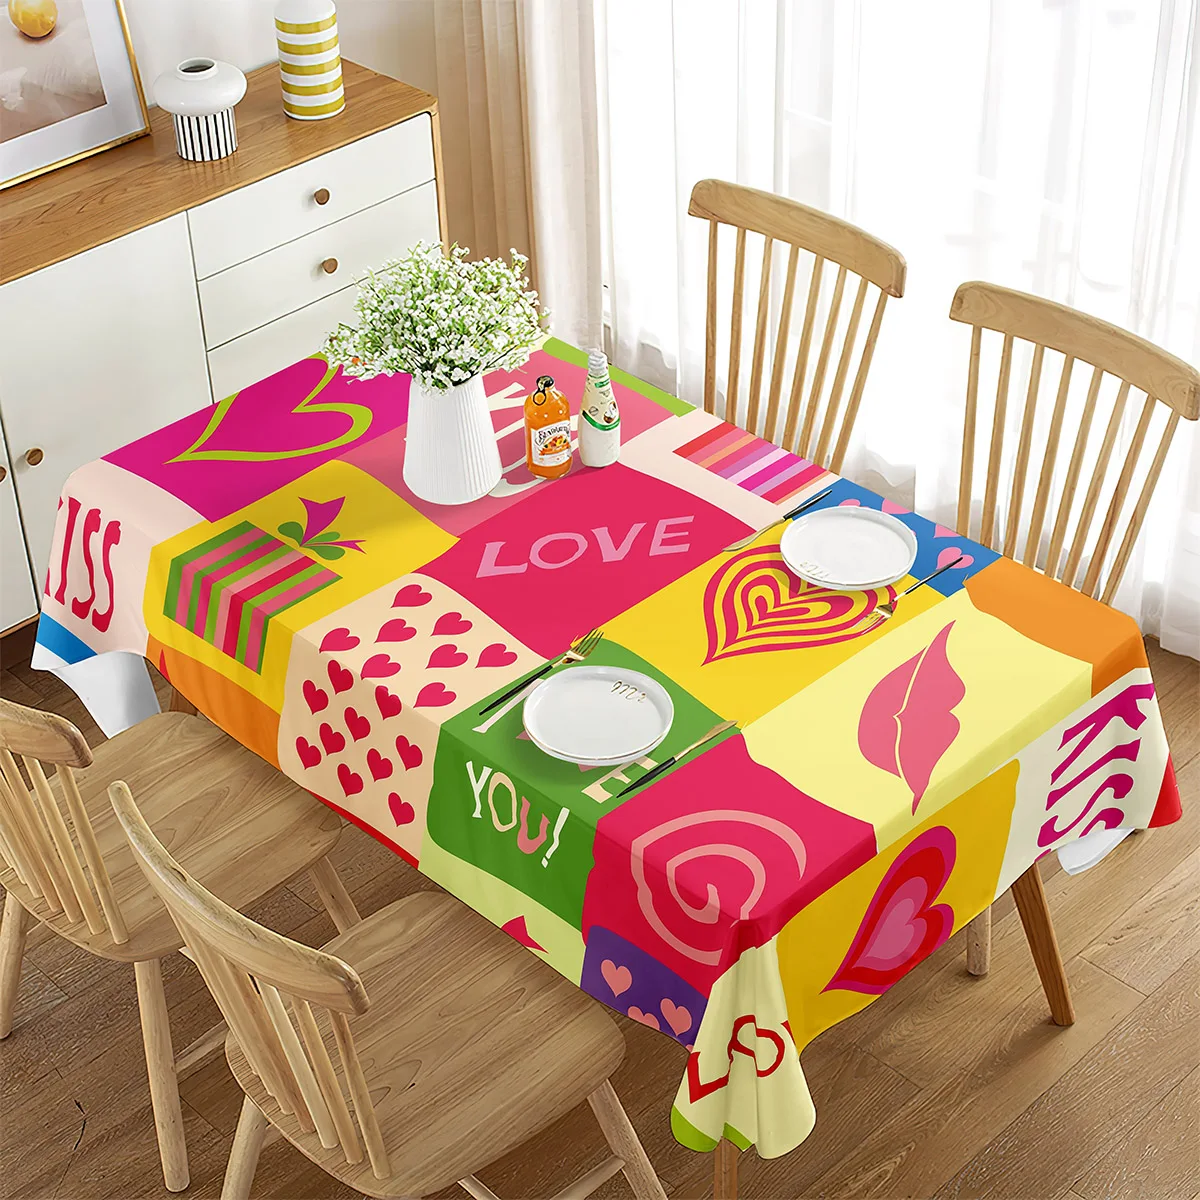 

Colourful Love Heart Tablecloth Romantic Theme Rectangular Tablecloth Dining Room Banquette Kitchen Outdoor Picnic Decoration